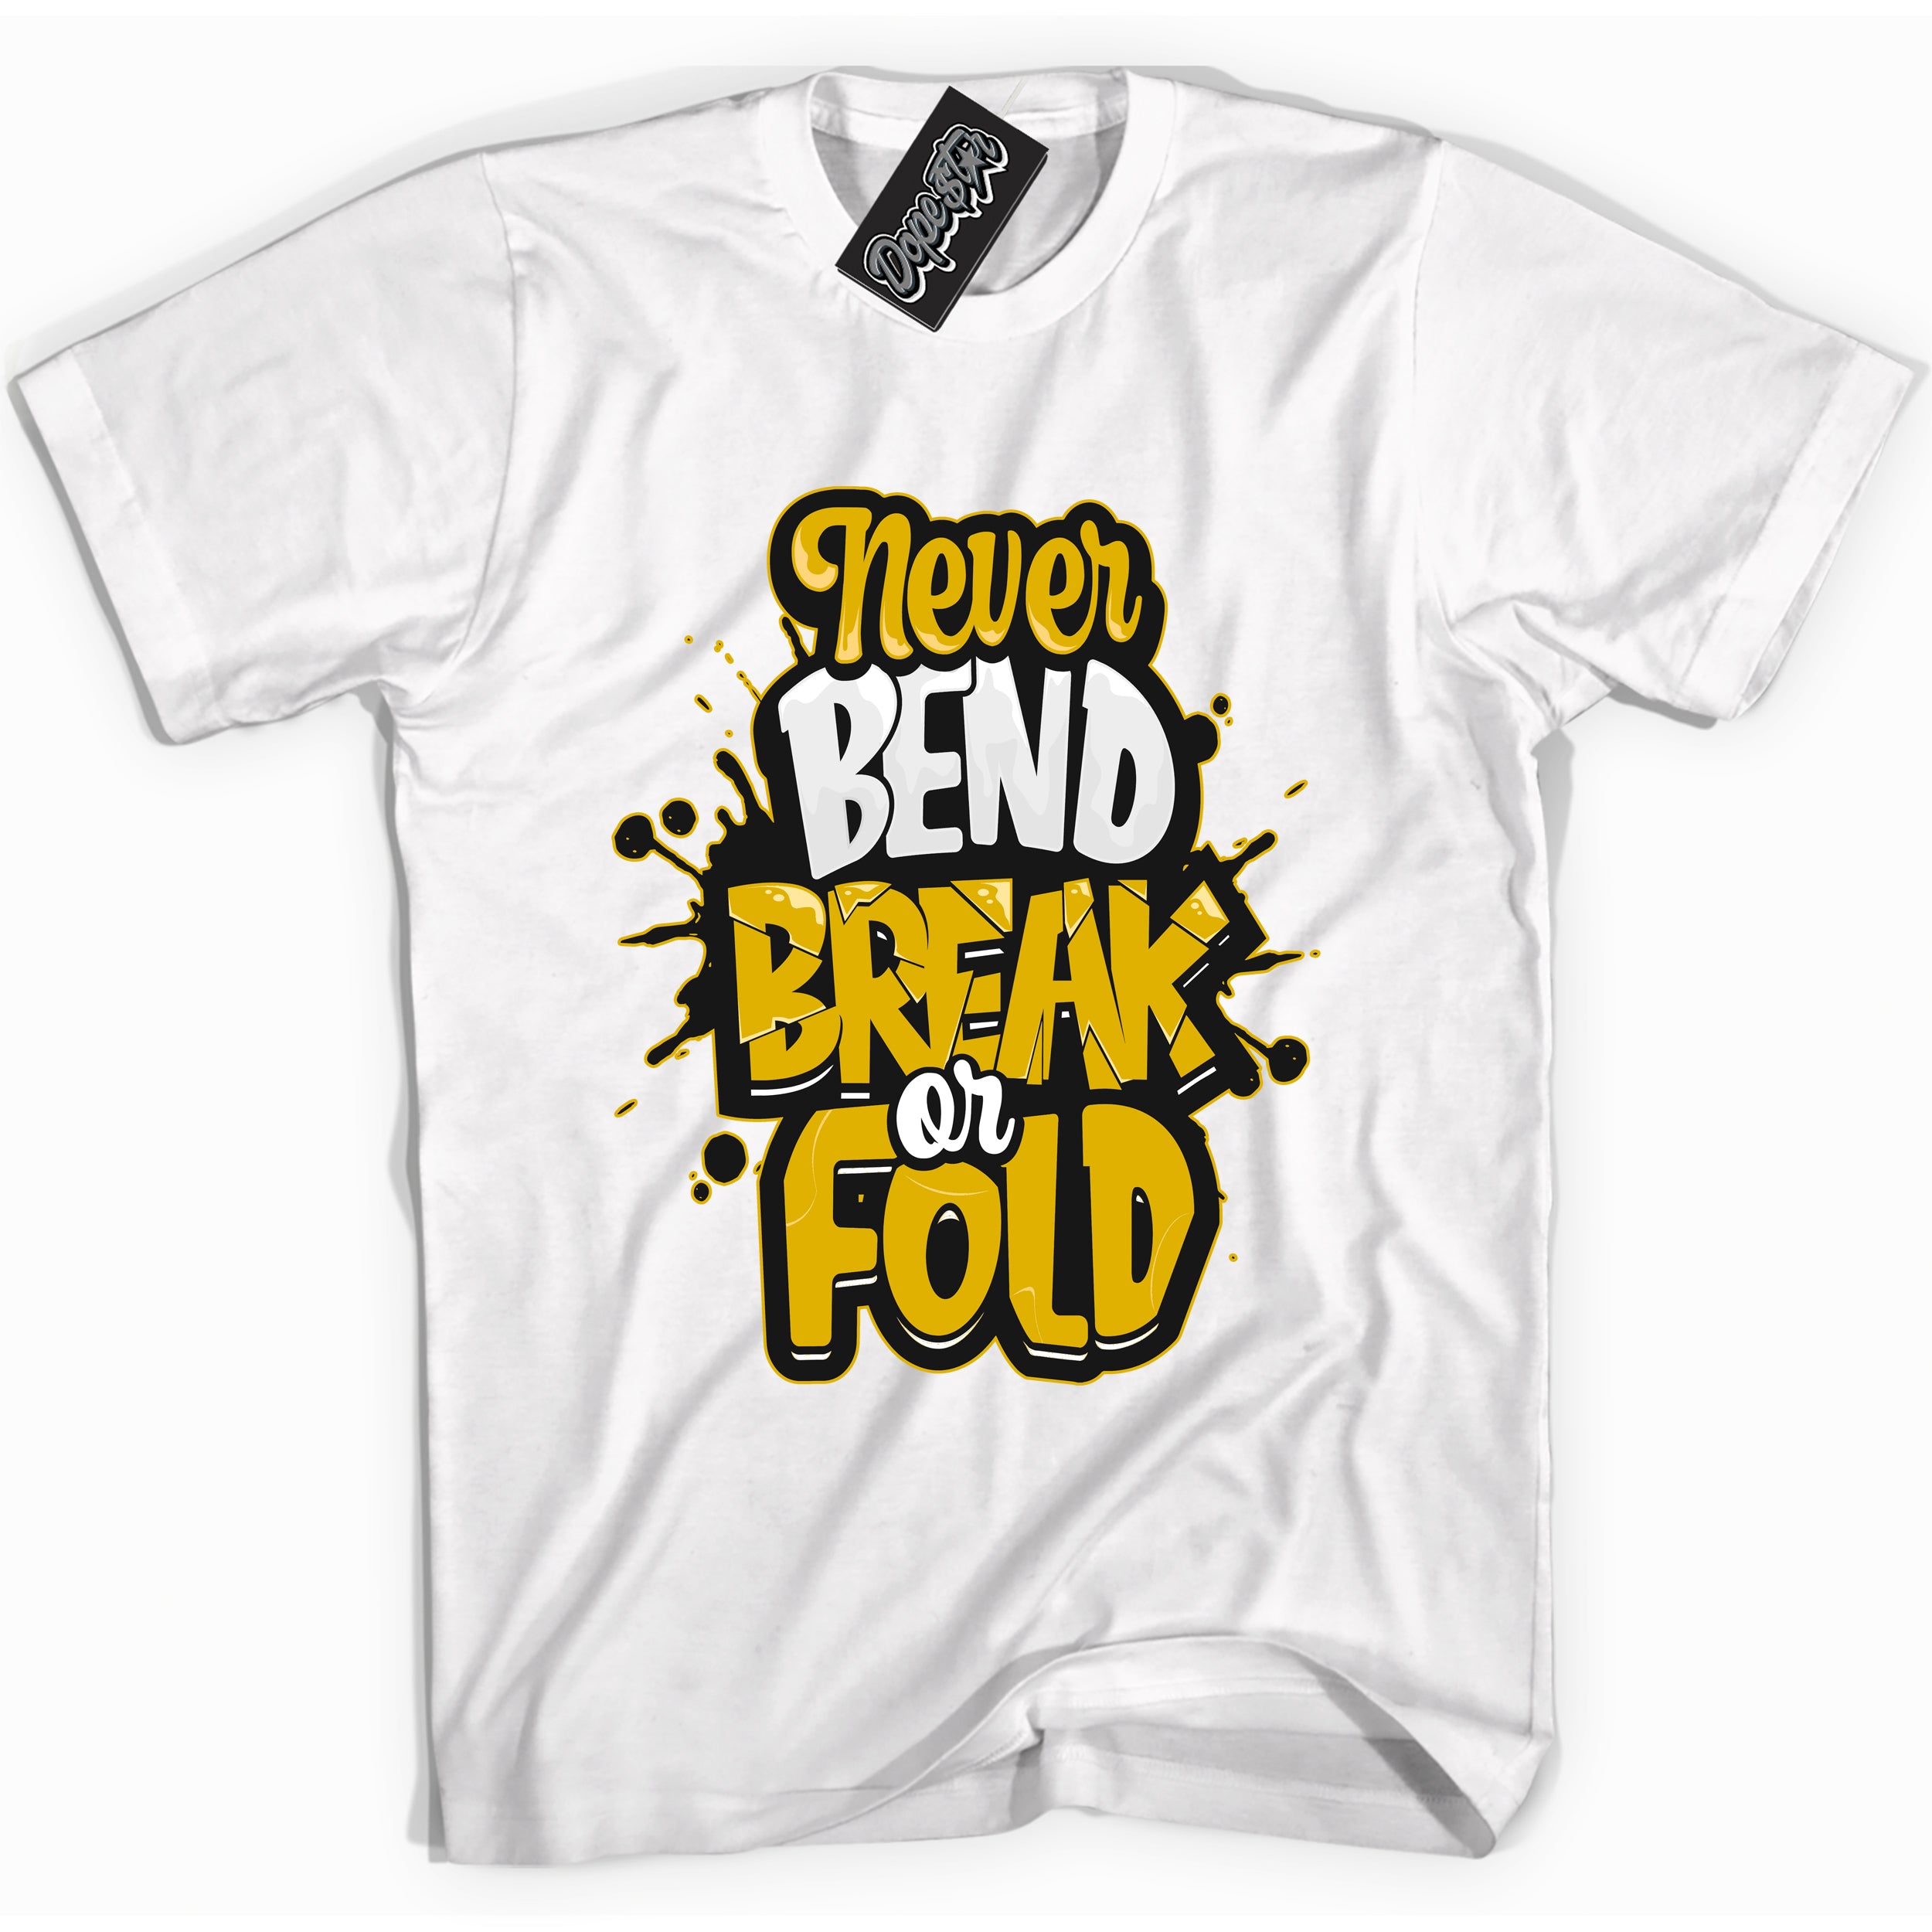 Cool White Shirt with “ Never Bend Break Or Fold” design that perfectly matches Yellow Ochre 6s Sneakers.